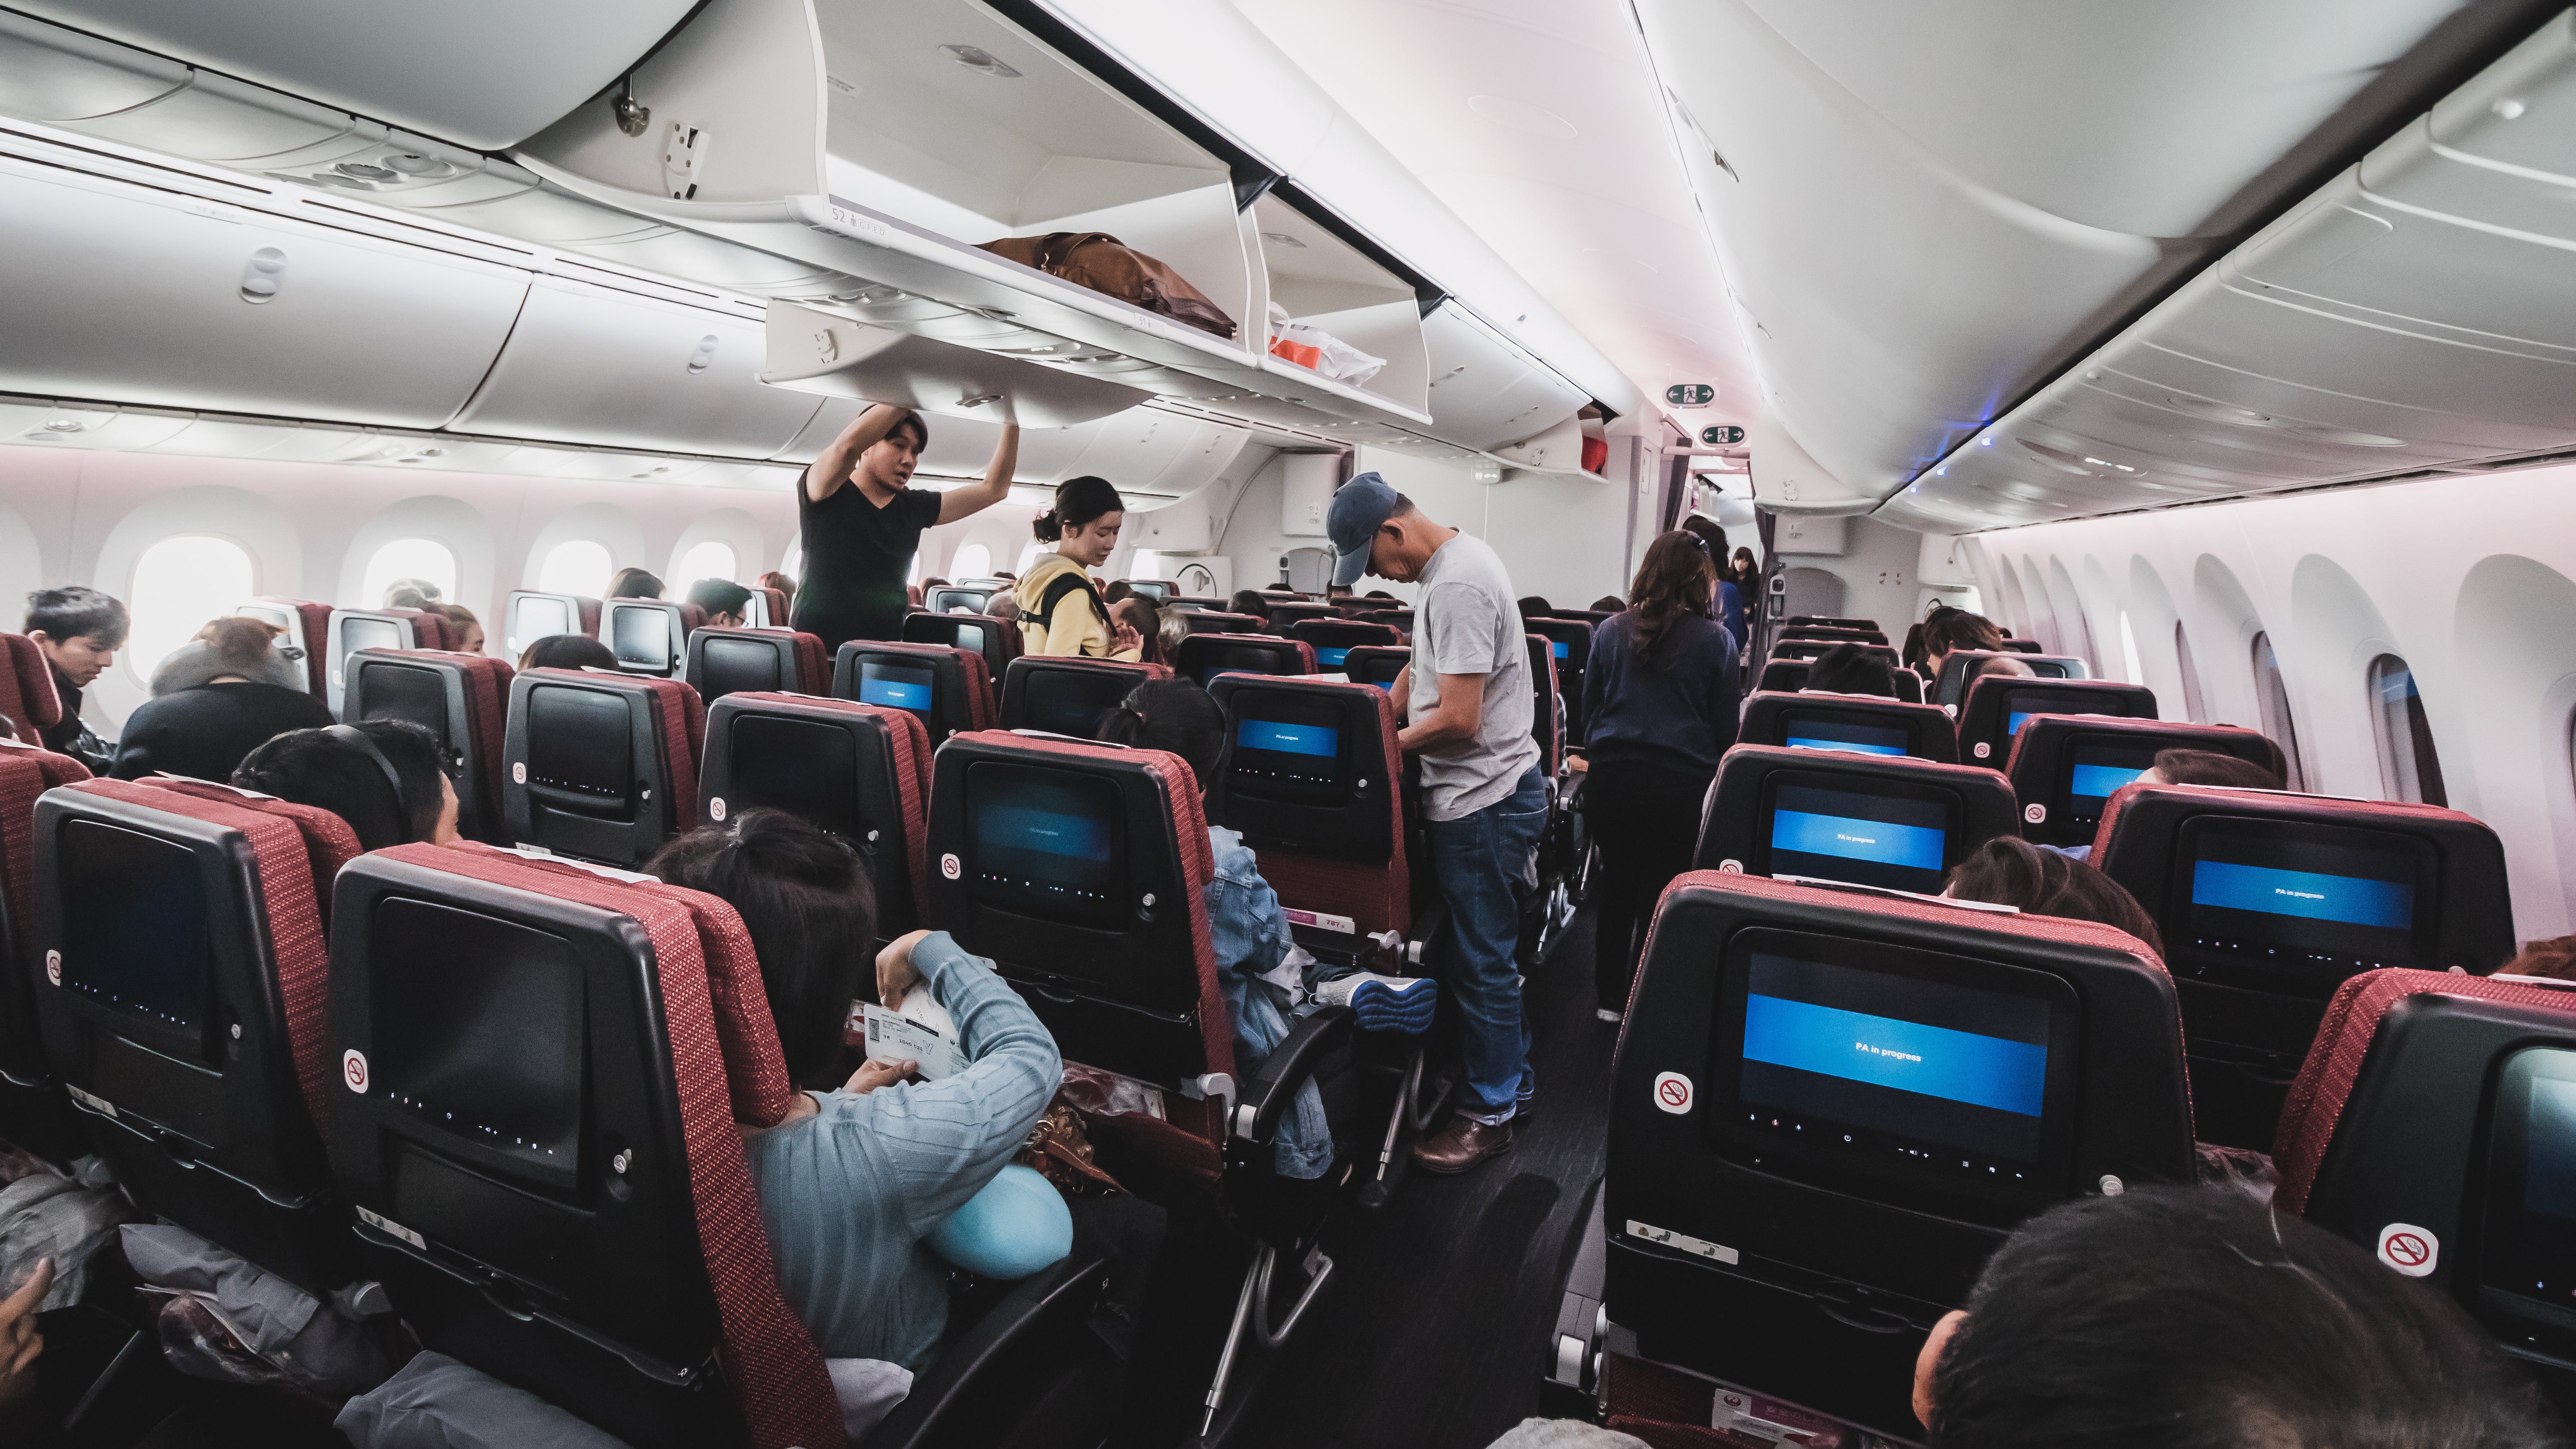 How To Survive The Middle Seat On Flights